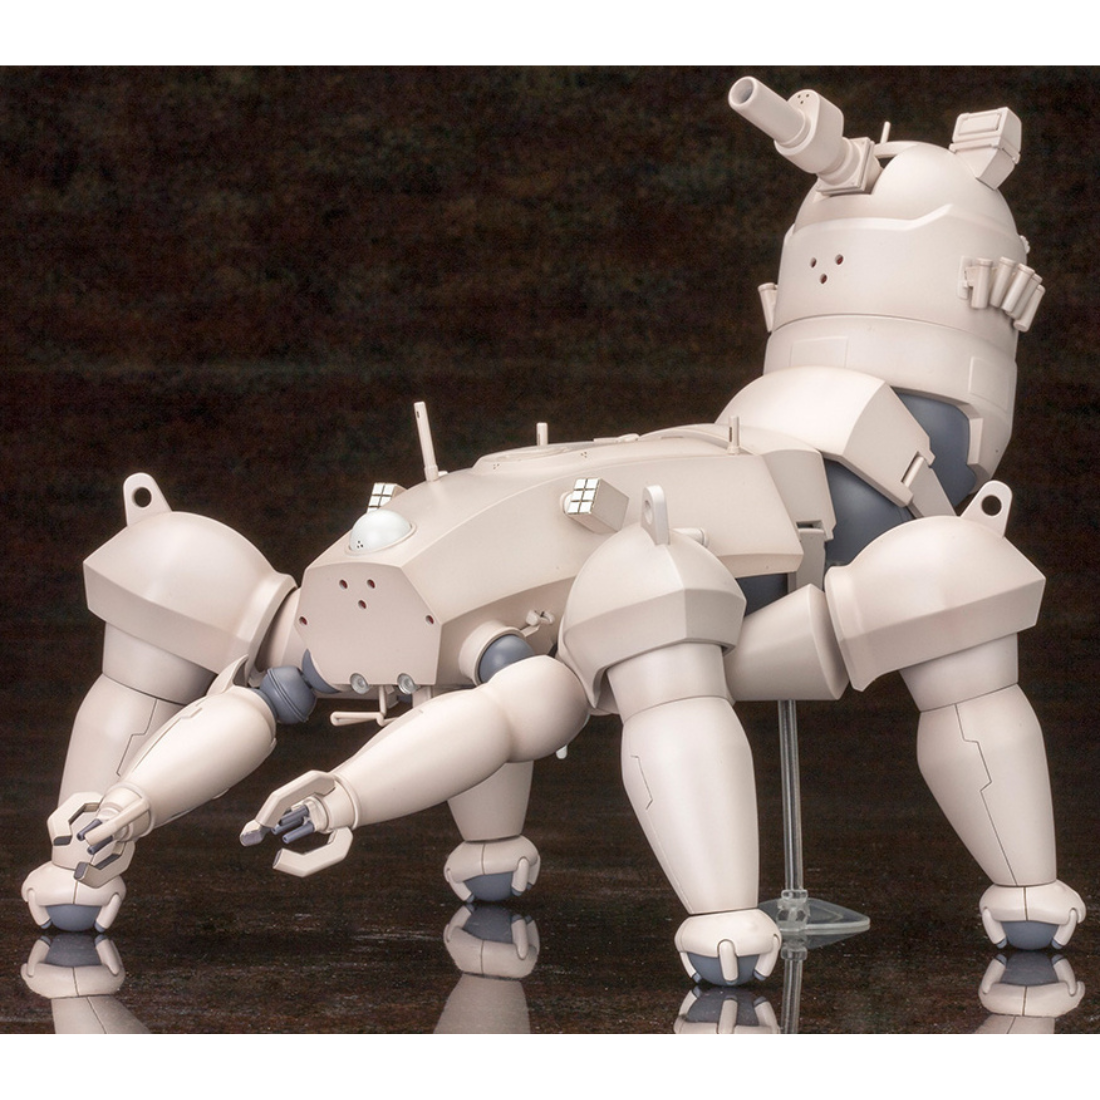 Haw206 Proto Type 1/35 Ghost in the Shell S.A.C. #KP259R Anime Model Kit by Kotobukiya